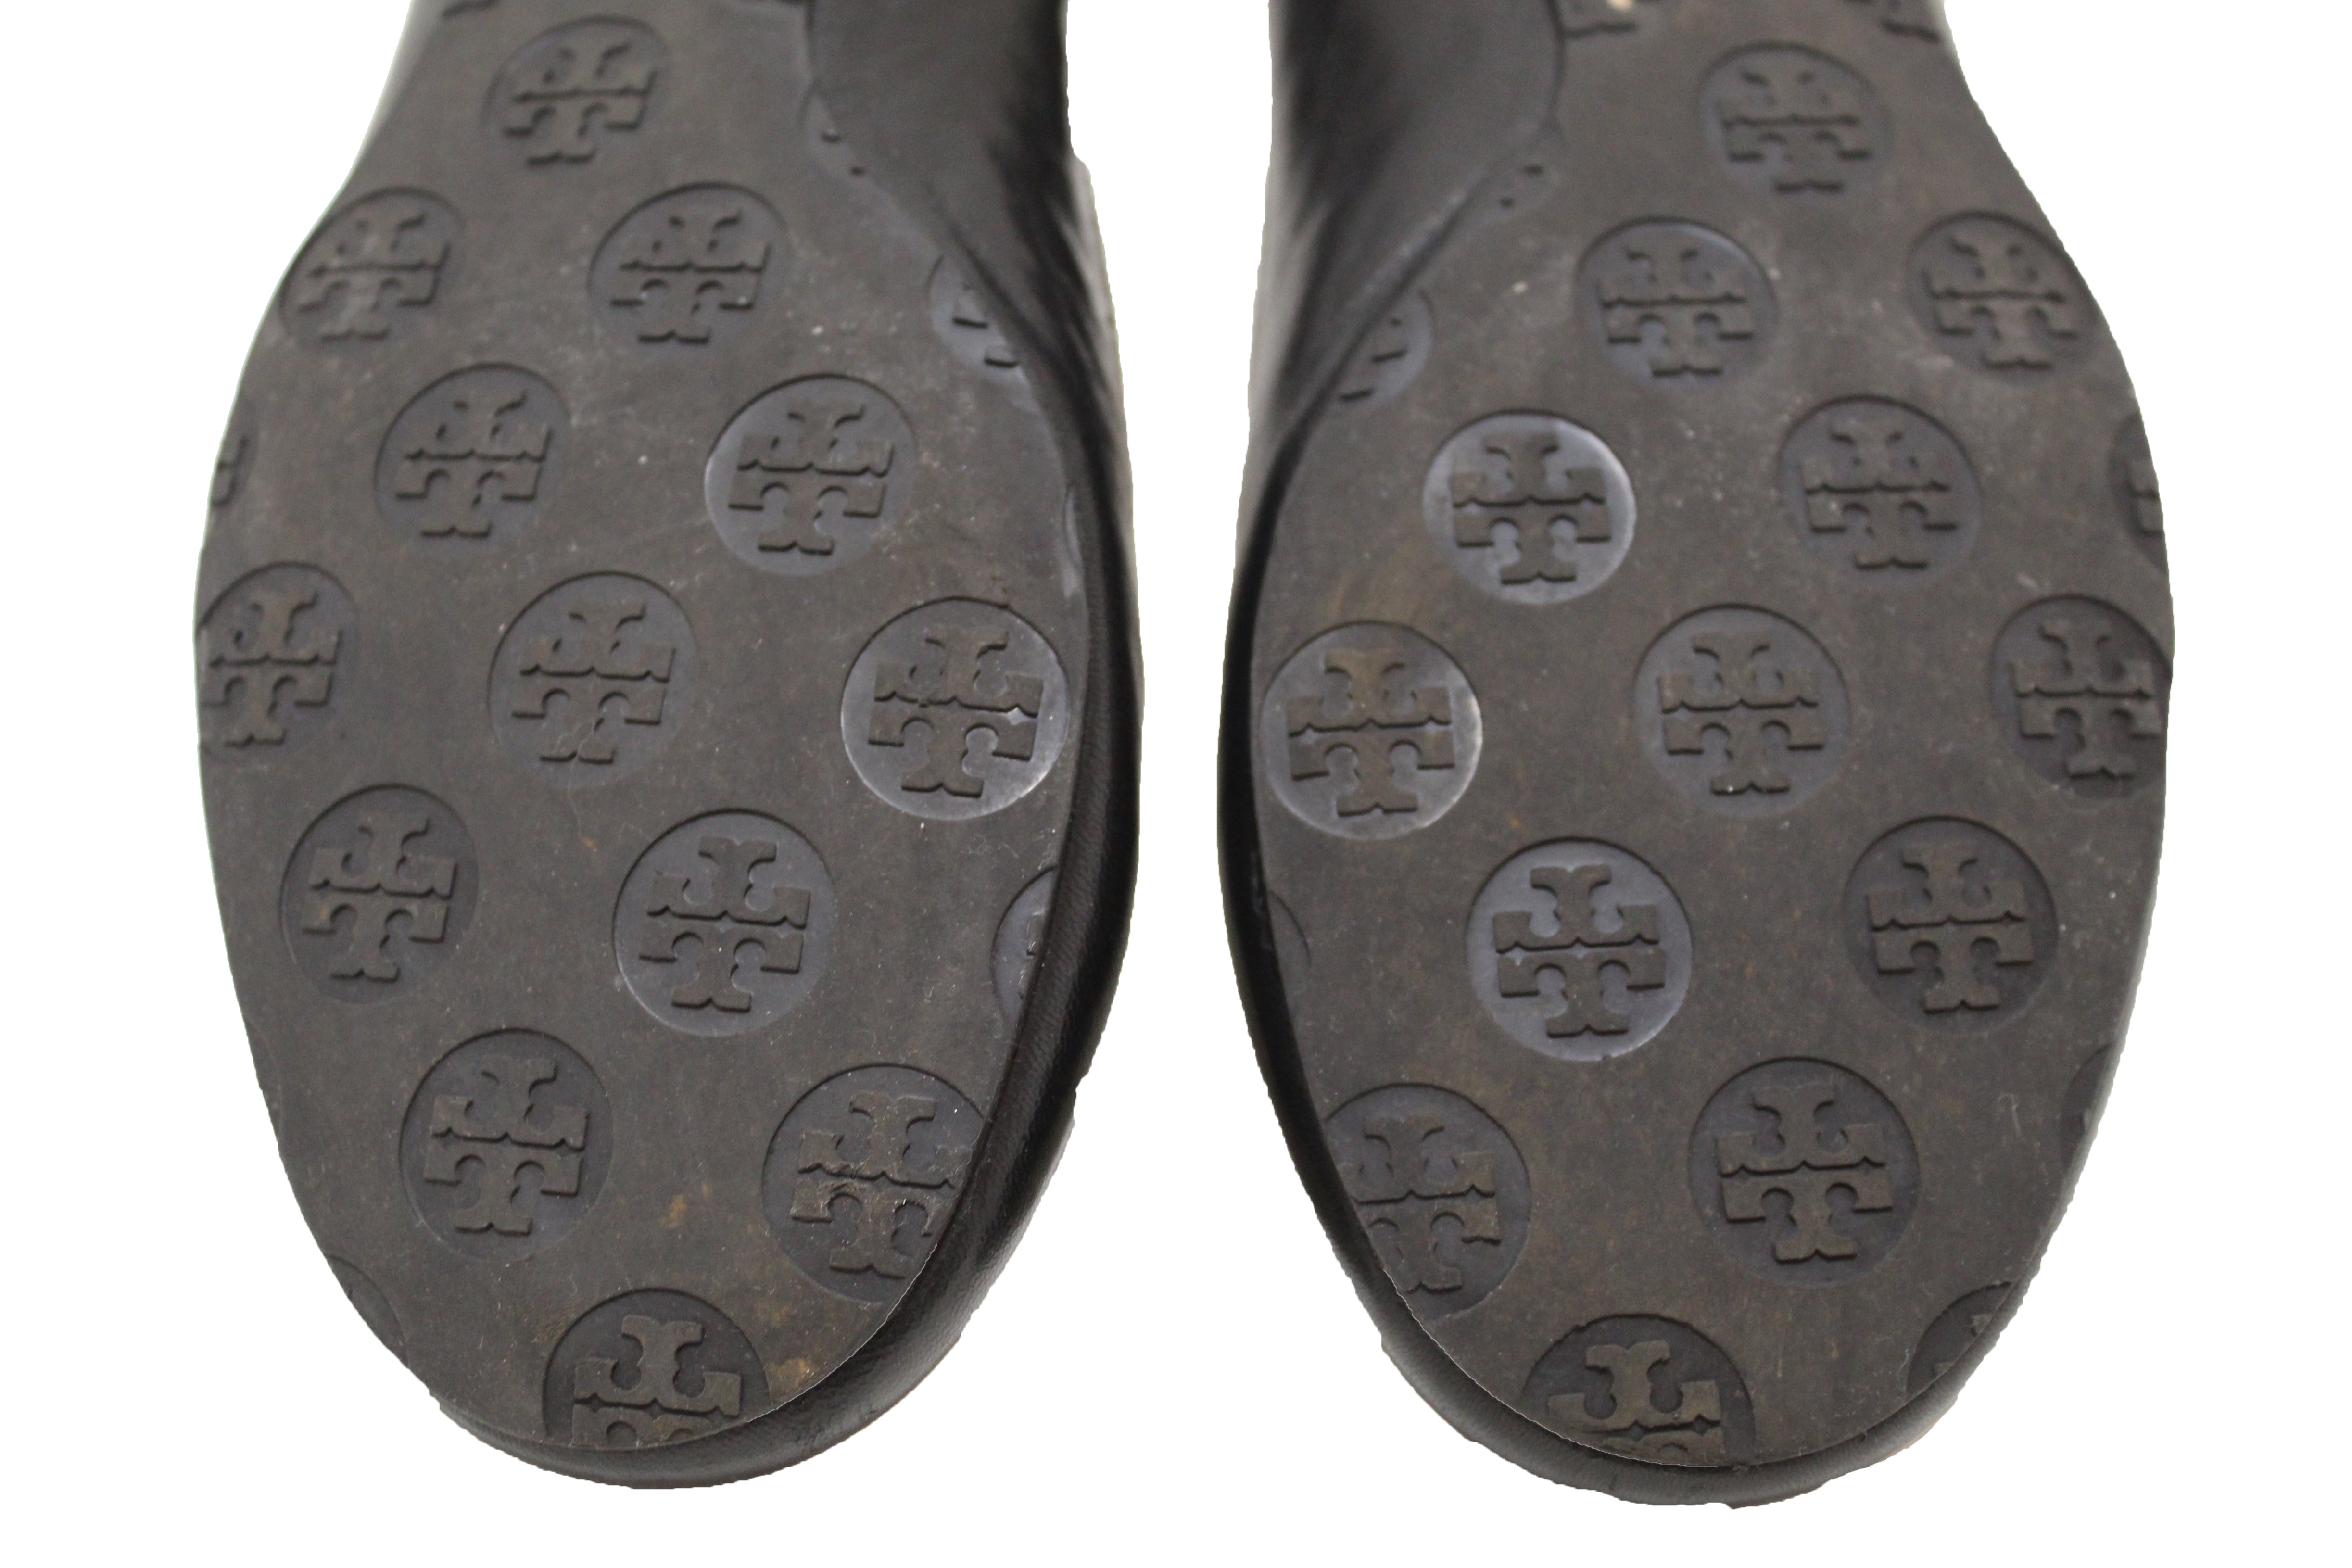 Authentic Tory Burch Black Leather Ballet Flat Shoes Size 8.5